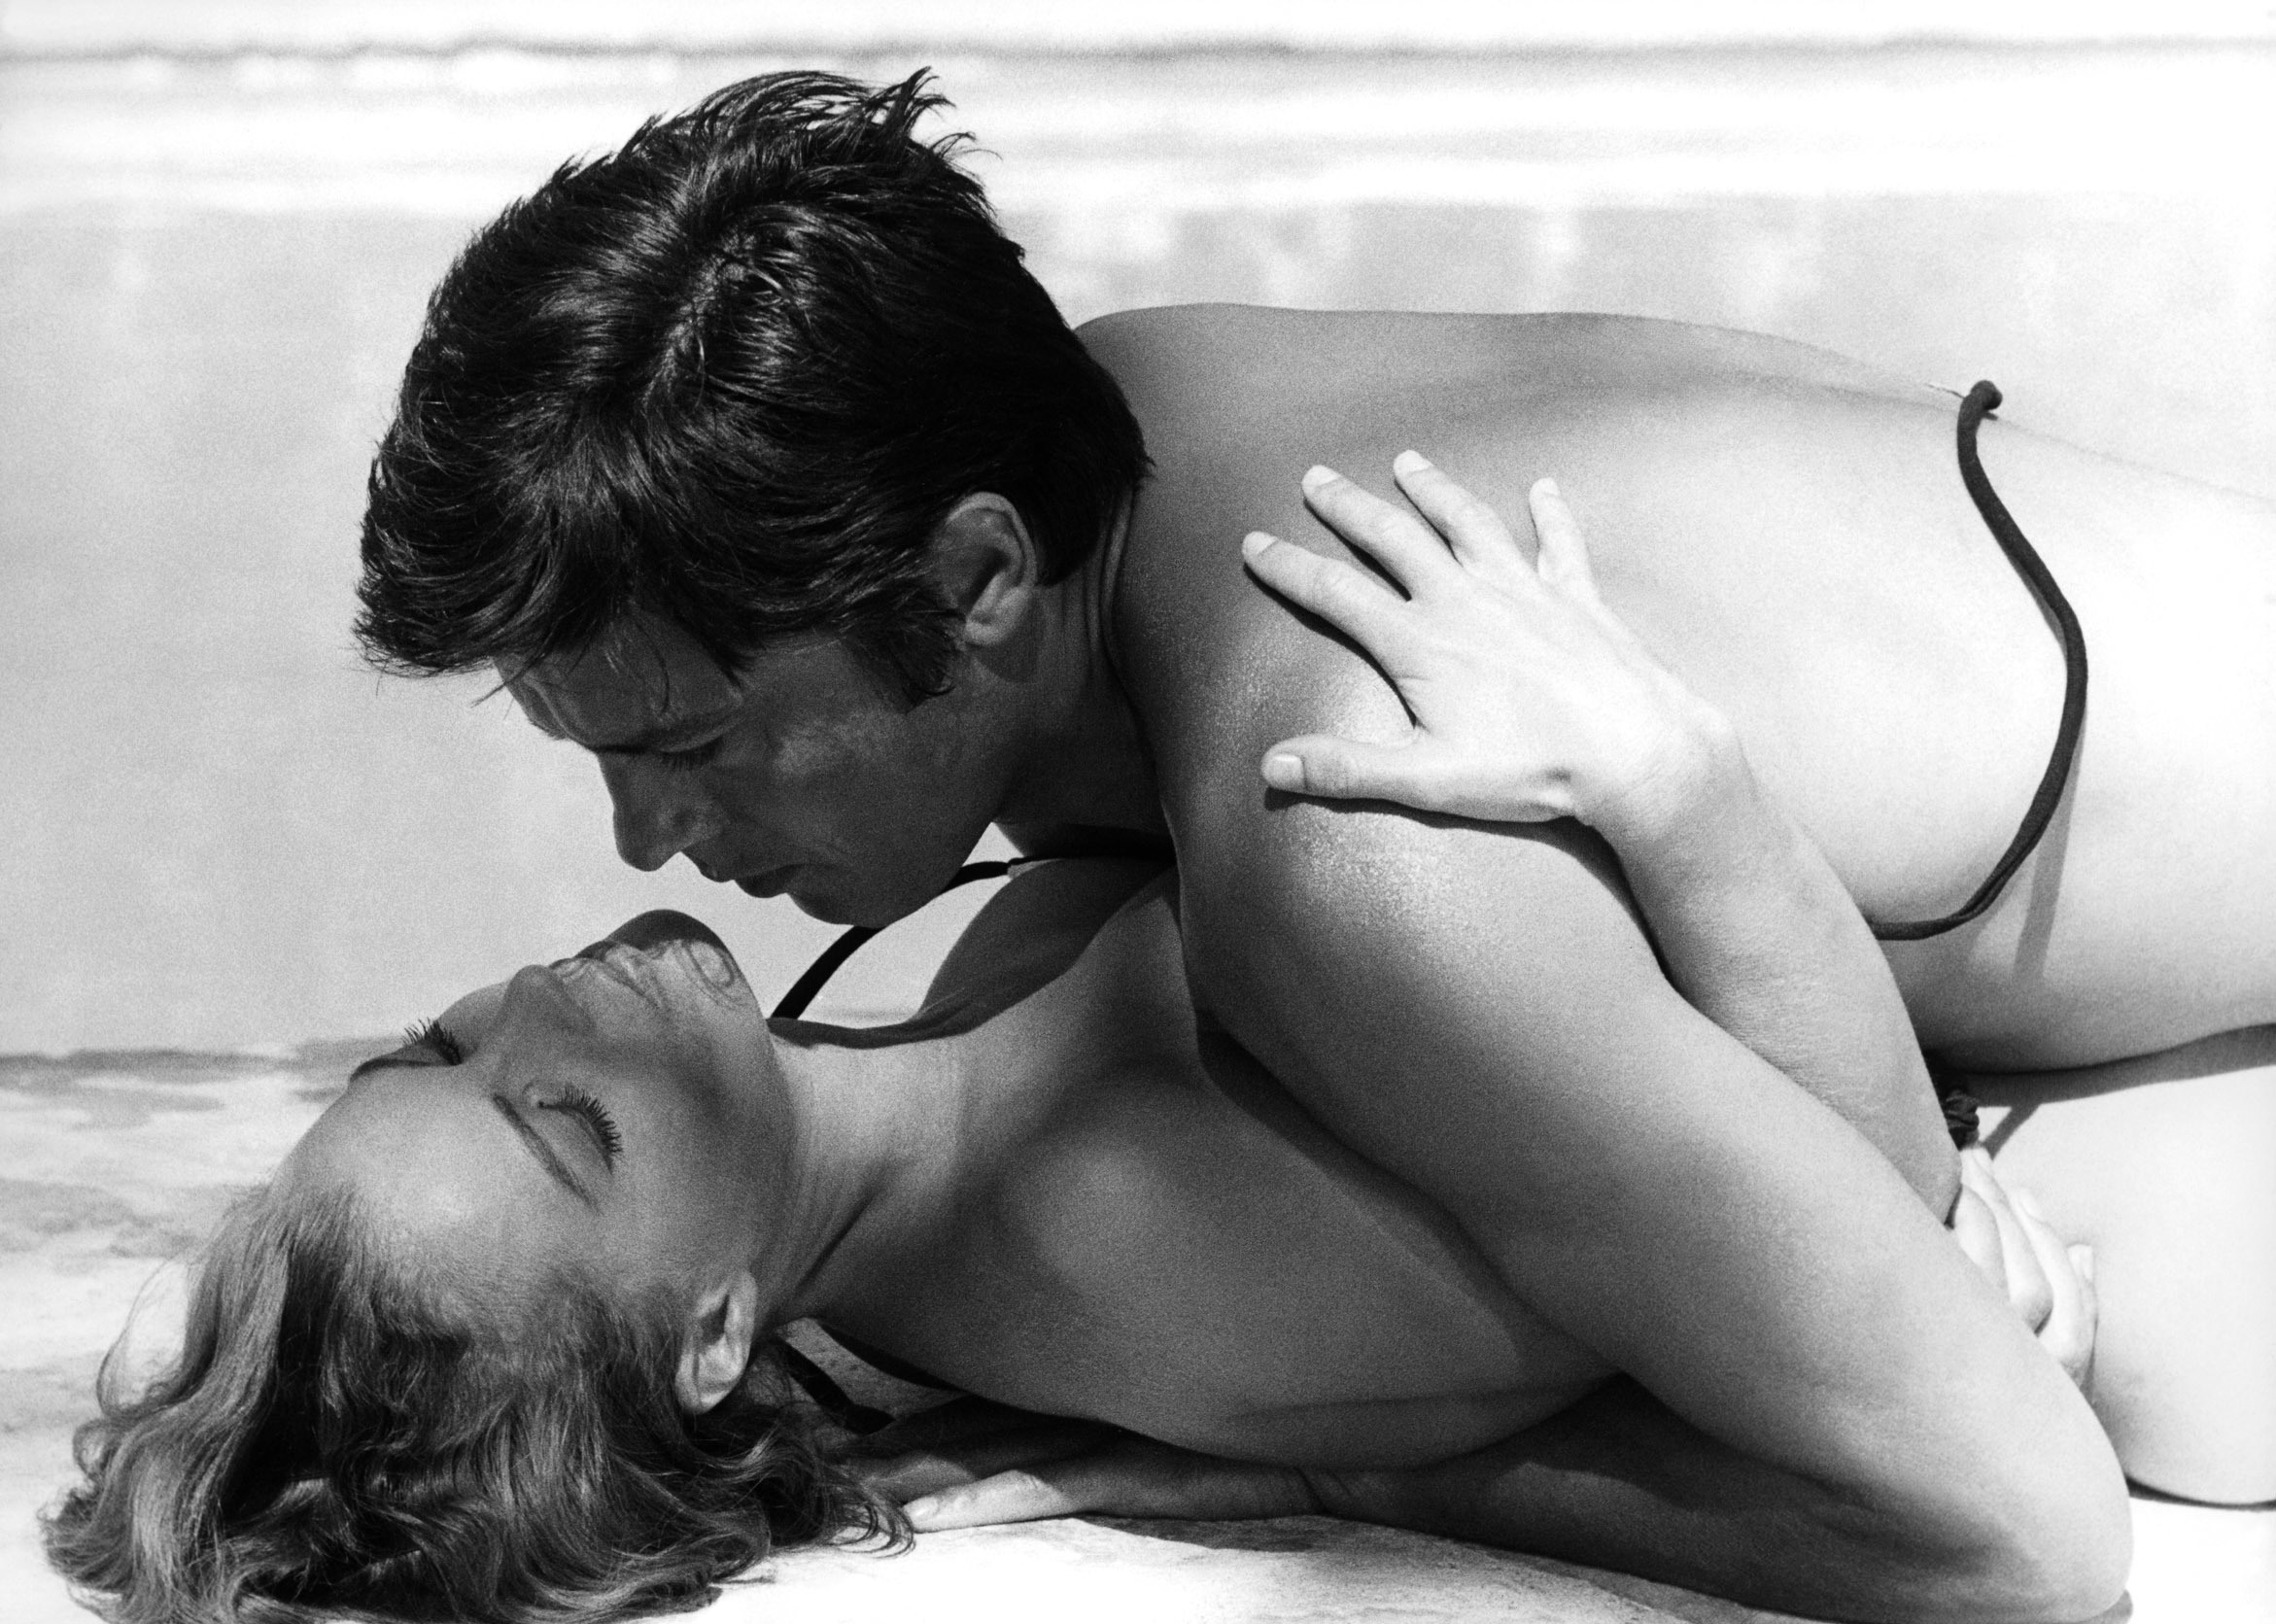 Romy Schneider and the man called the love of his life, Alain Delon, in 'The Pool' (1969).